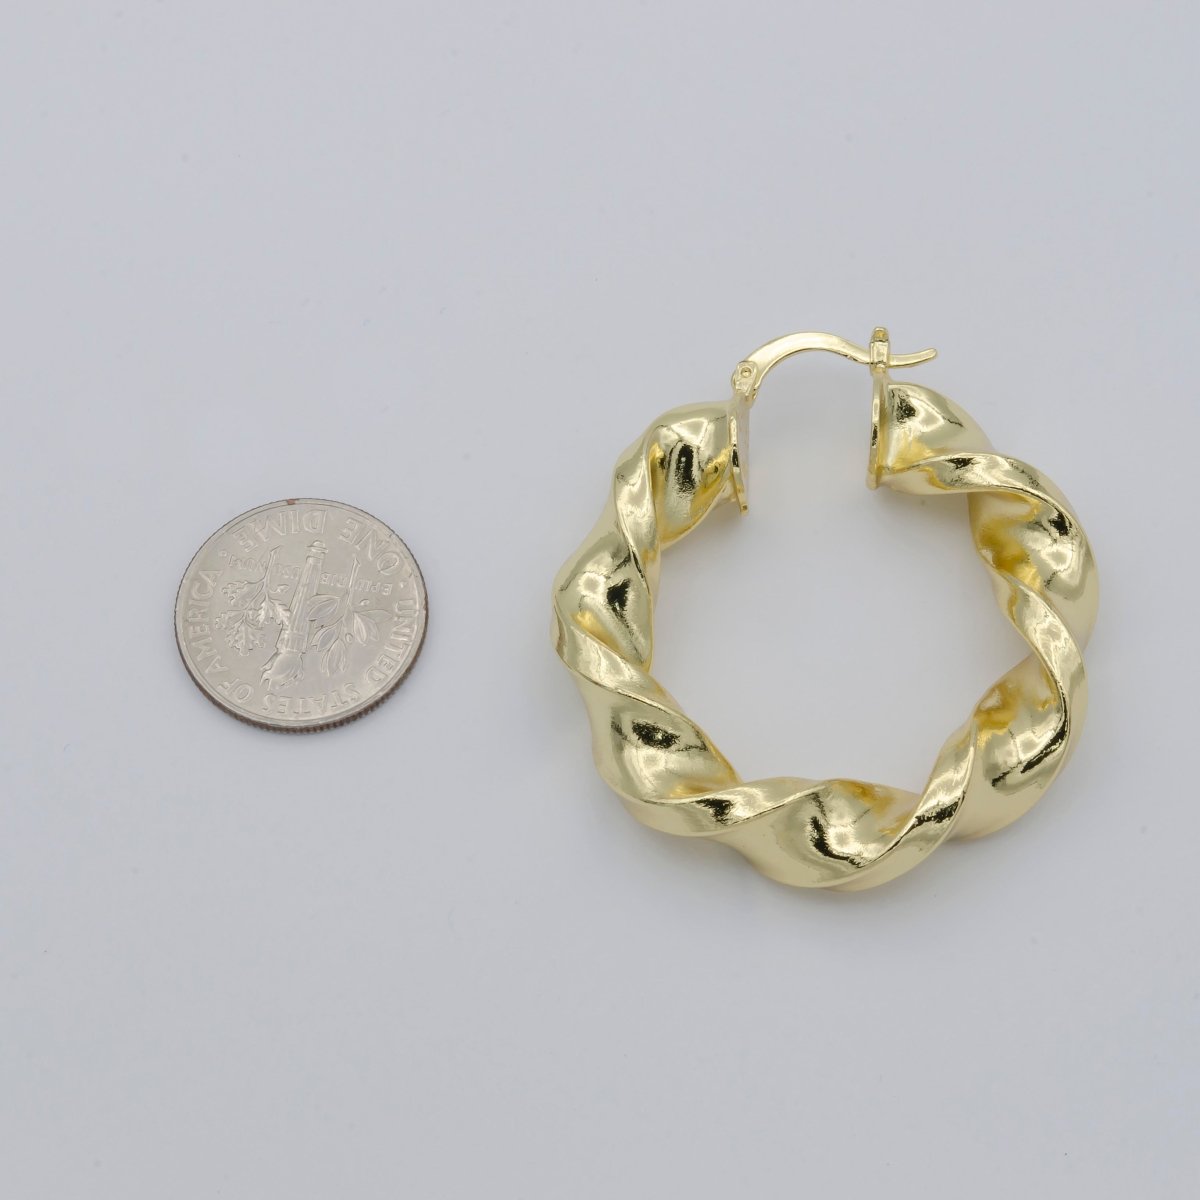 Golden Braid Circle Round Huggies Earrings, Plain Gold Filled Geometric Braid Shape Casual/Formal Daily Earring Jewelry P-108 - DLUXCA